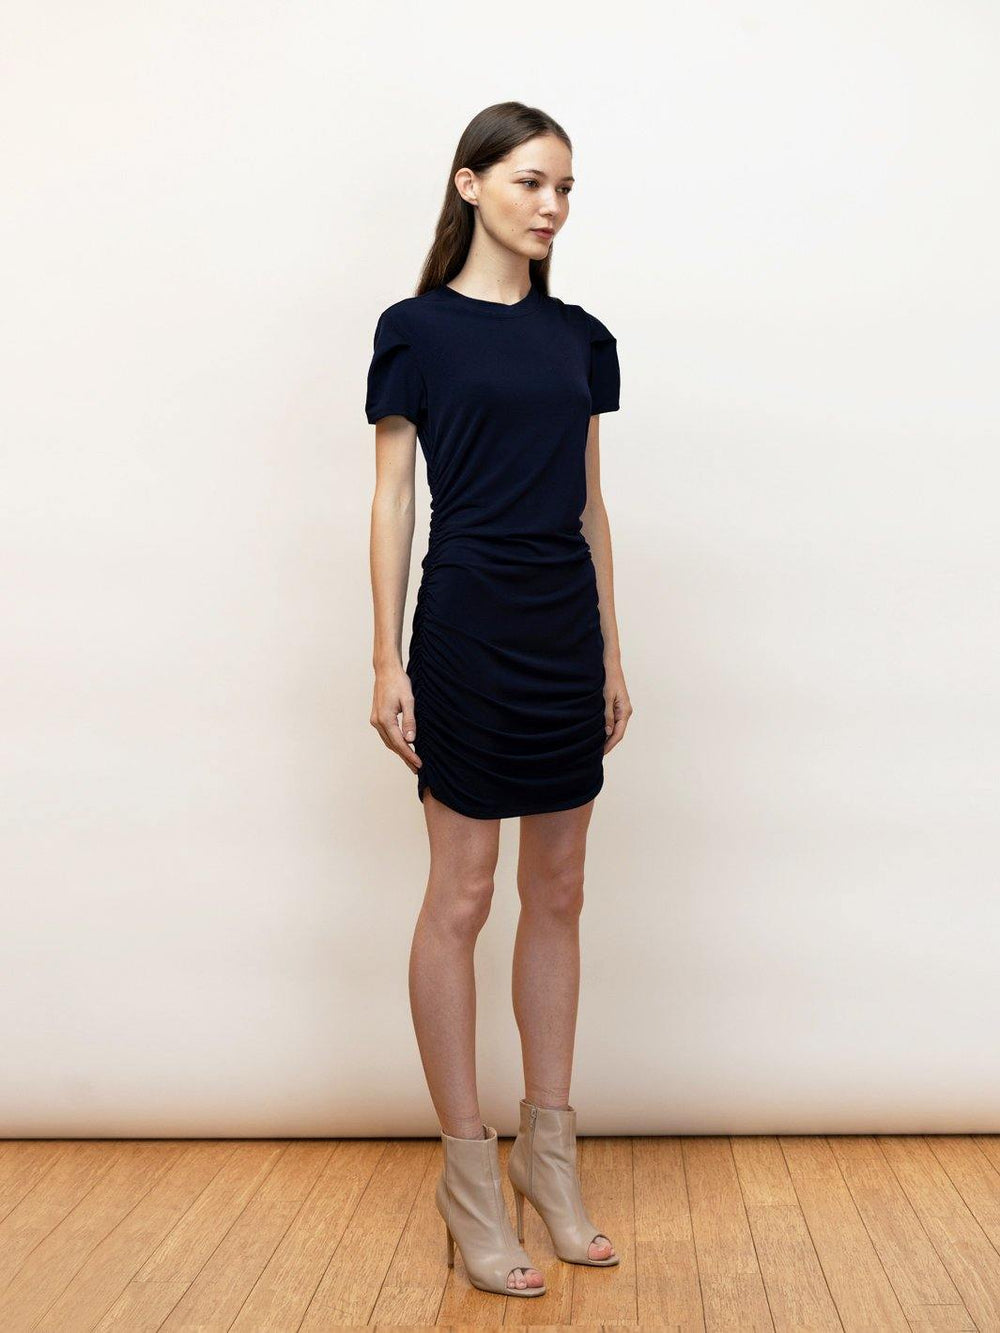 Chic, navy, short sleeve, smart casual tee dress in jersey knit. Body gathers and draped sleeves.